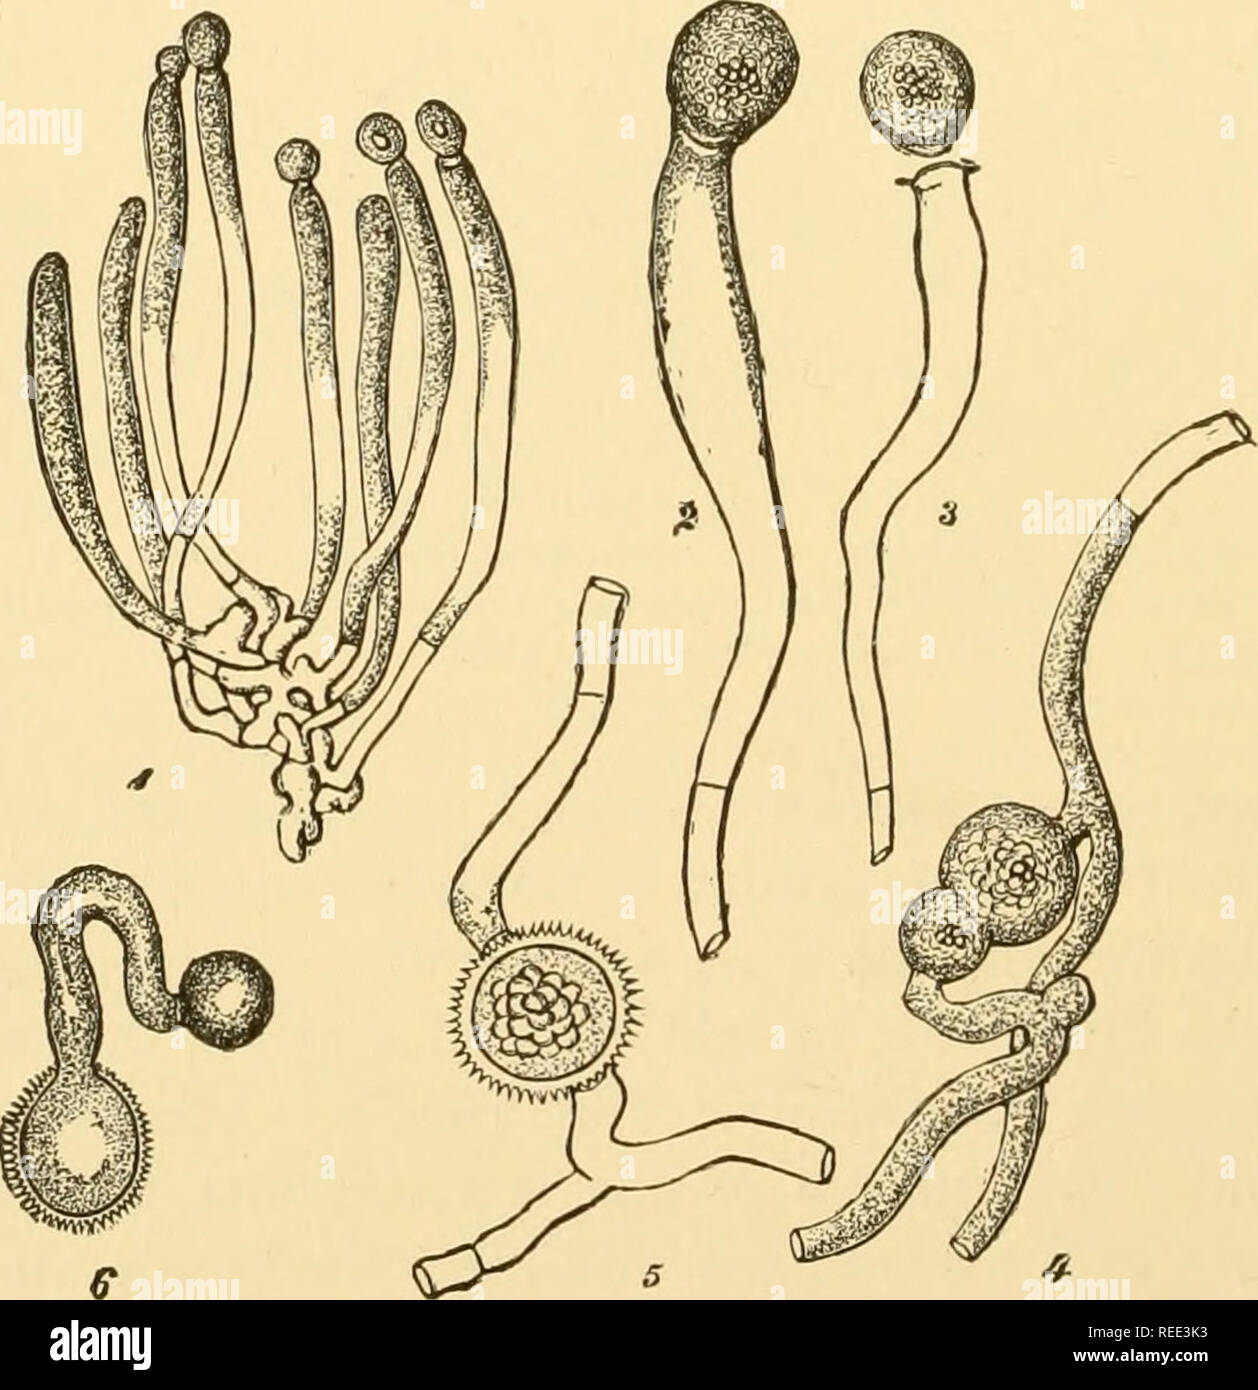 . Comparative morphology of Fungi. Fungi. Fig. 72.—Basidiobolus ranarum. 1 to 3. A conidium has divided as in Fig. 70 into two halves which behave as gametangia and form a zygospore each. 4. Germinating zygospore. (1 to 3 X 335; 4 X 575; after Eidam, 1887.) conidia germinate with a single germ tube, which in insufficient nourish- ment, ends in a secondary conidium, but under favorable conditions develops to a mycelium with numerous sacs. This is coenocytic when young; after one or two days, however, it forms numerous septa. Finally. Yiq. 73.—Conidiobolus utriculosus. 1. Mycelium with condiopho Stock Photo